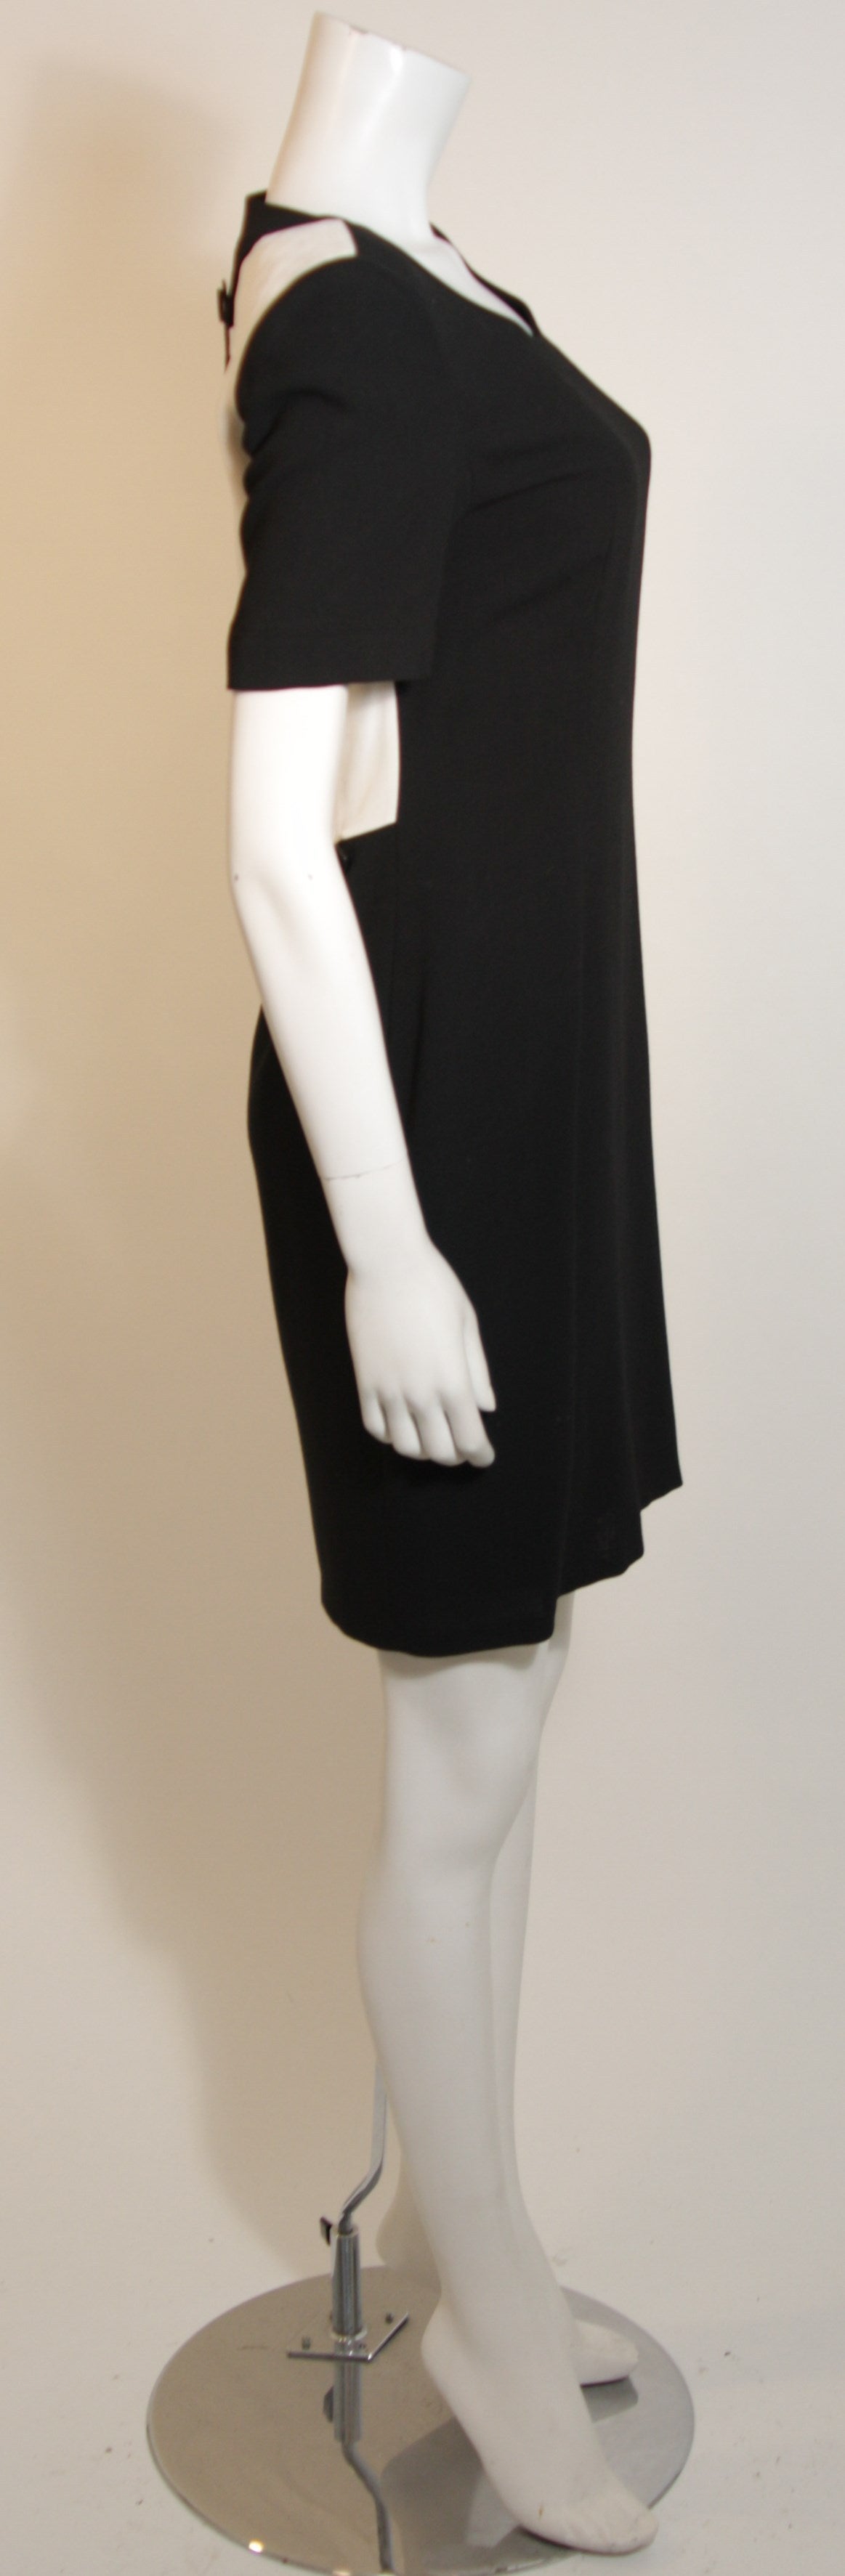 Women's Gianfranco Ferre Black and White Contrast Dress with Suspender detail Size 40 For Sale